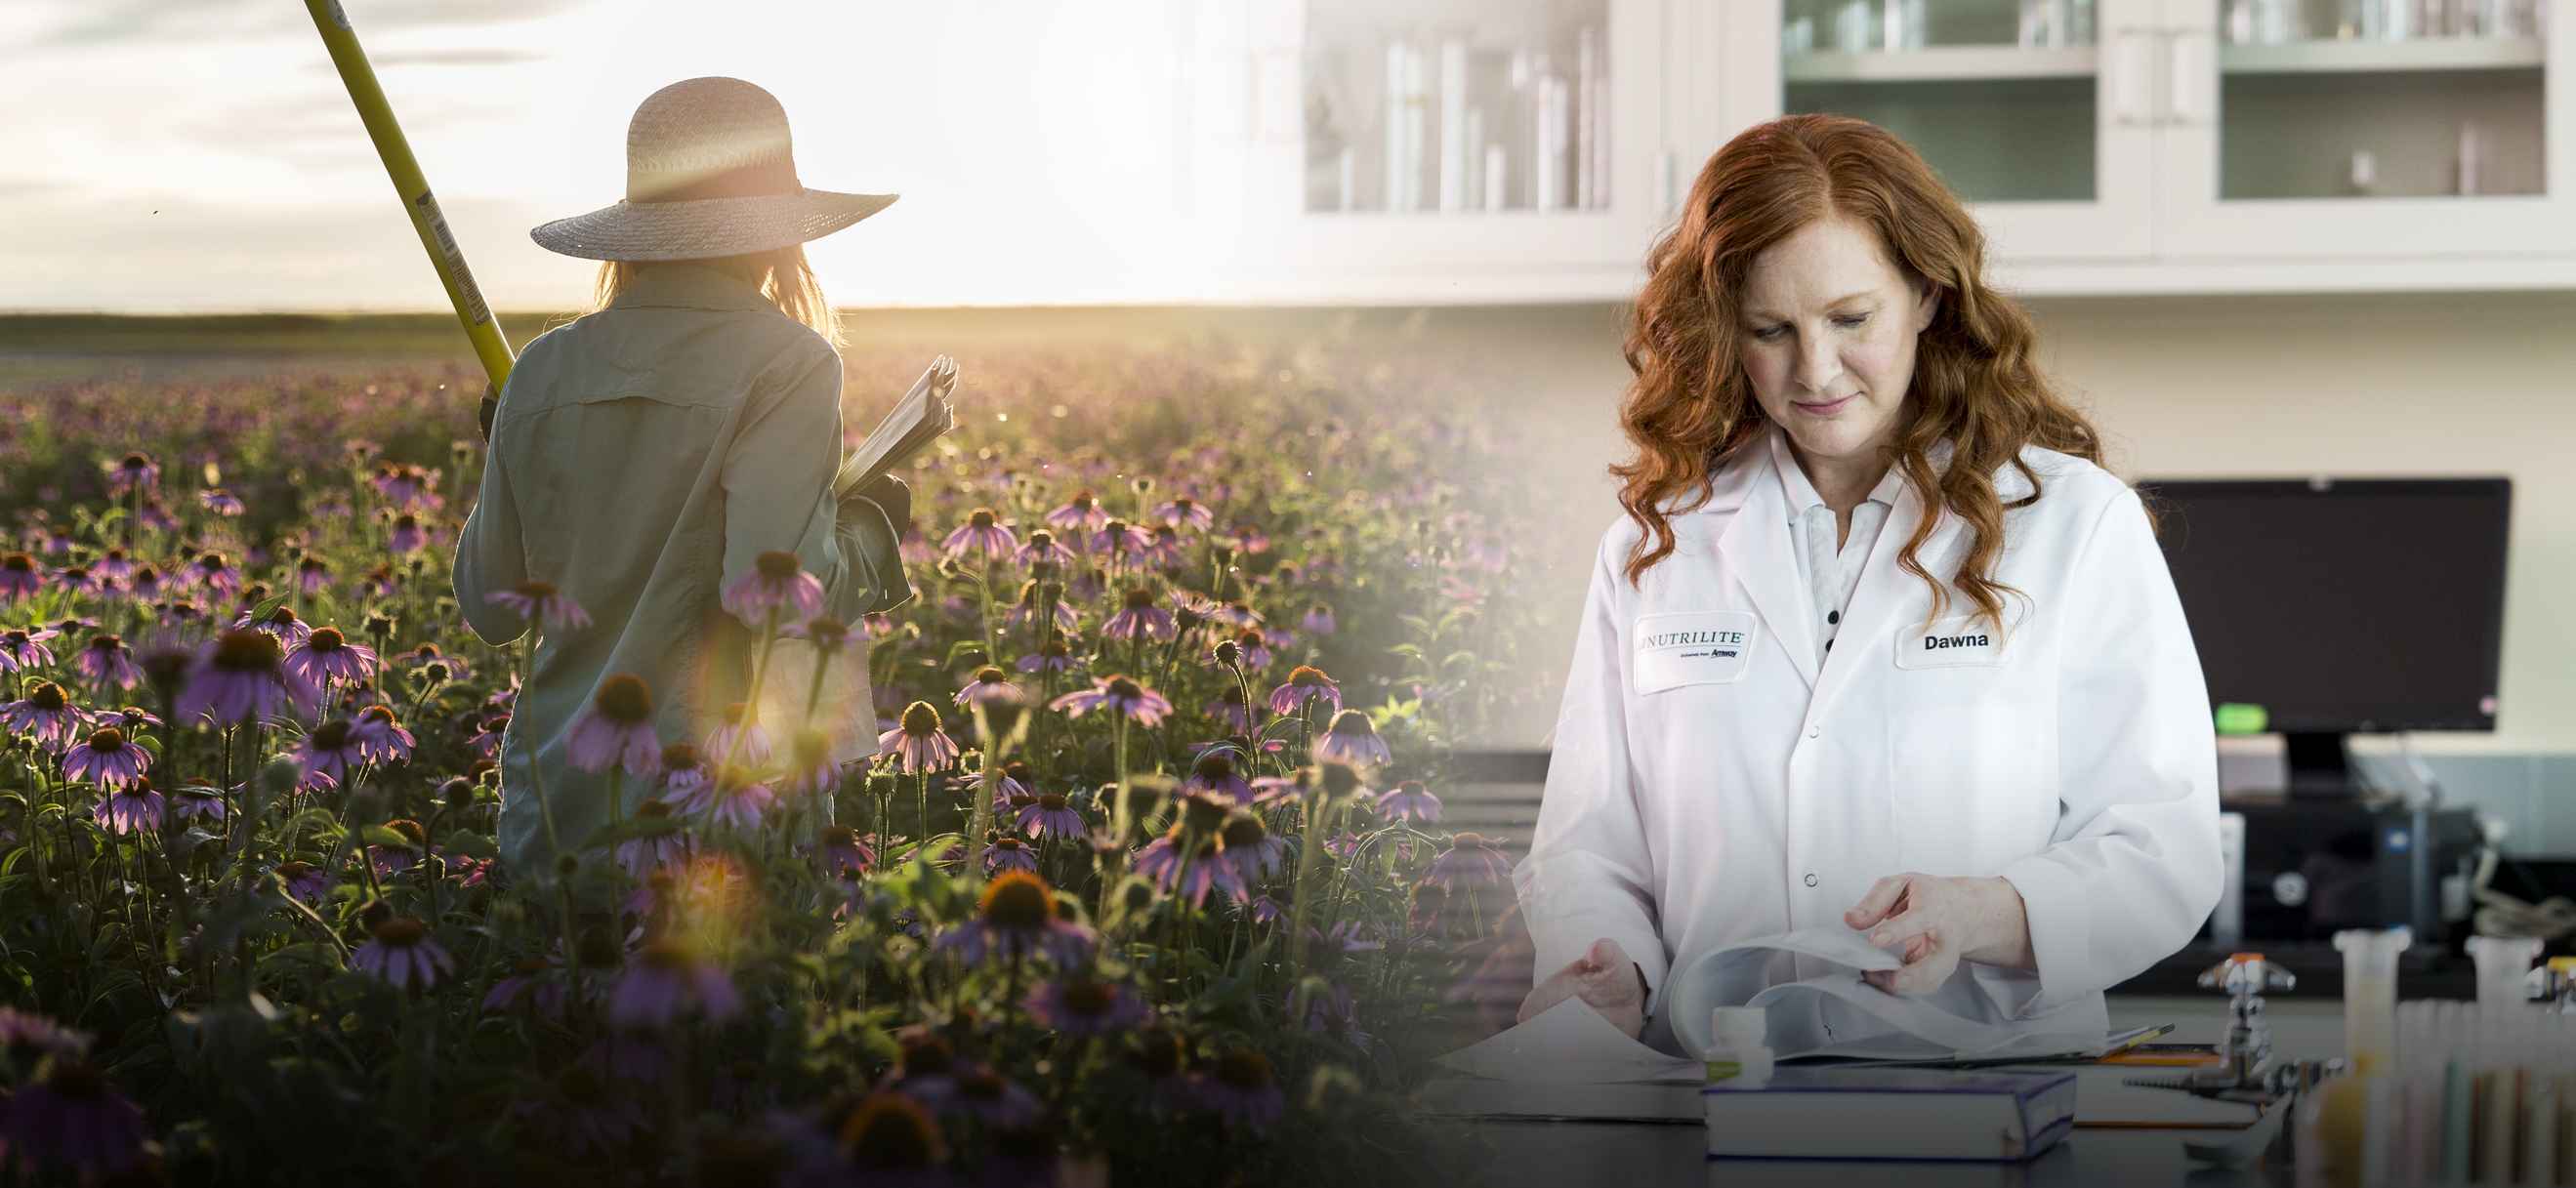 Field researcher Jessica Corcoran walks the echinacea field at Trout Lake West and Principal Research Scientist Dawna Venzon, PhD, RD, reviews literature in the lab. Hundreds of employees work together to ensure Nutrilite™ brand supplements are pure, safe and effective.